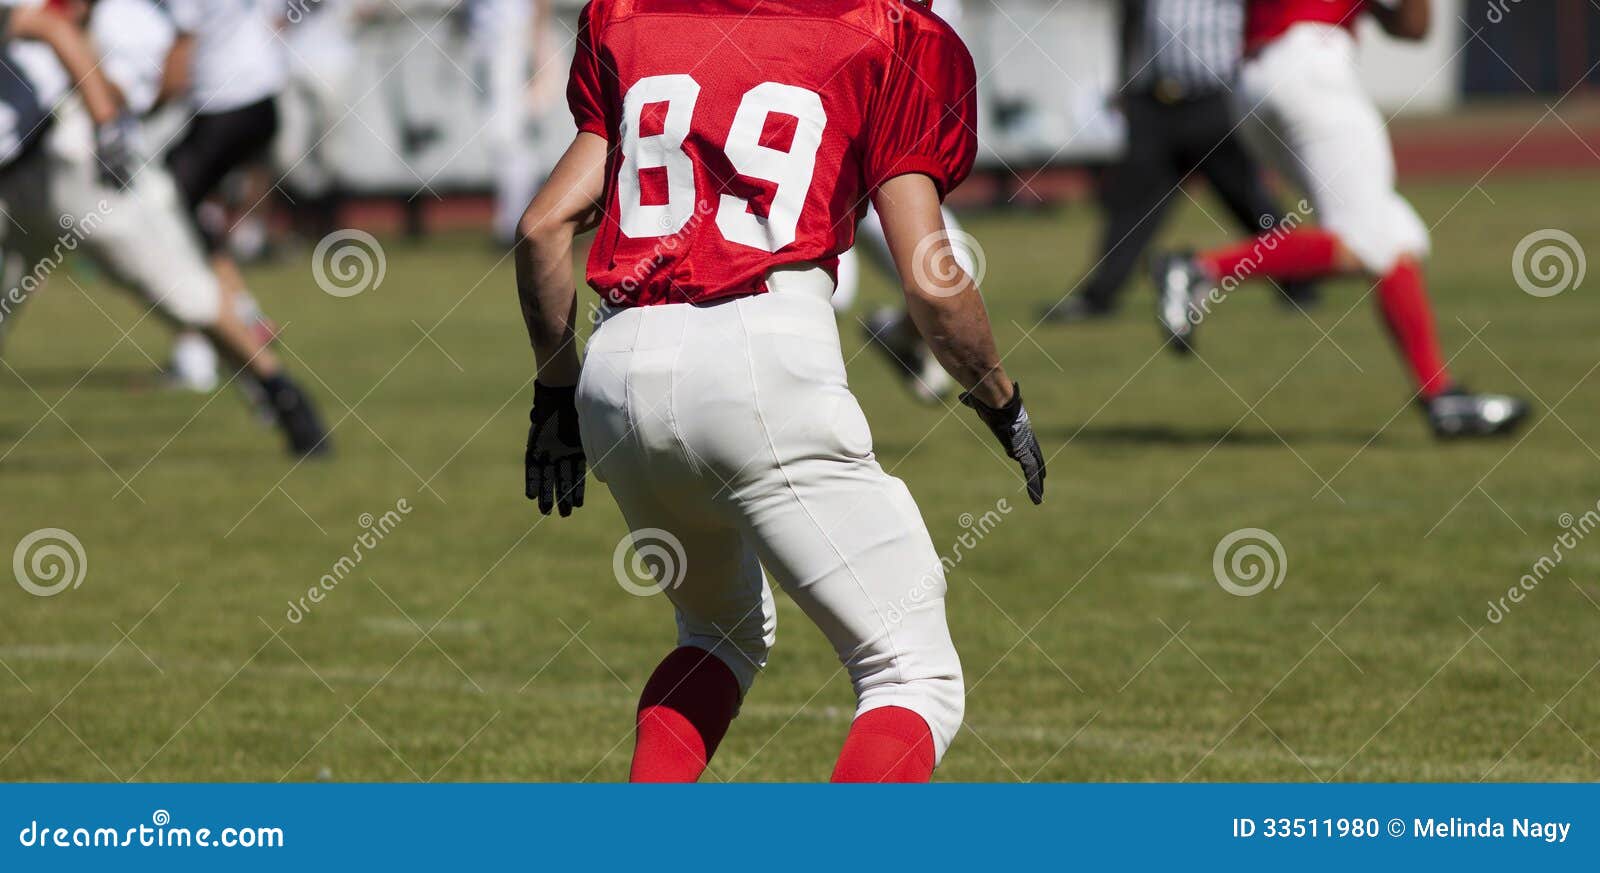 American football game stock photo. Image of competition - 33511980